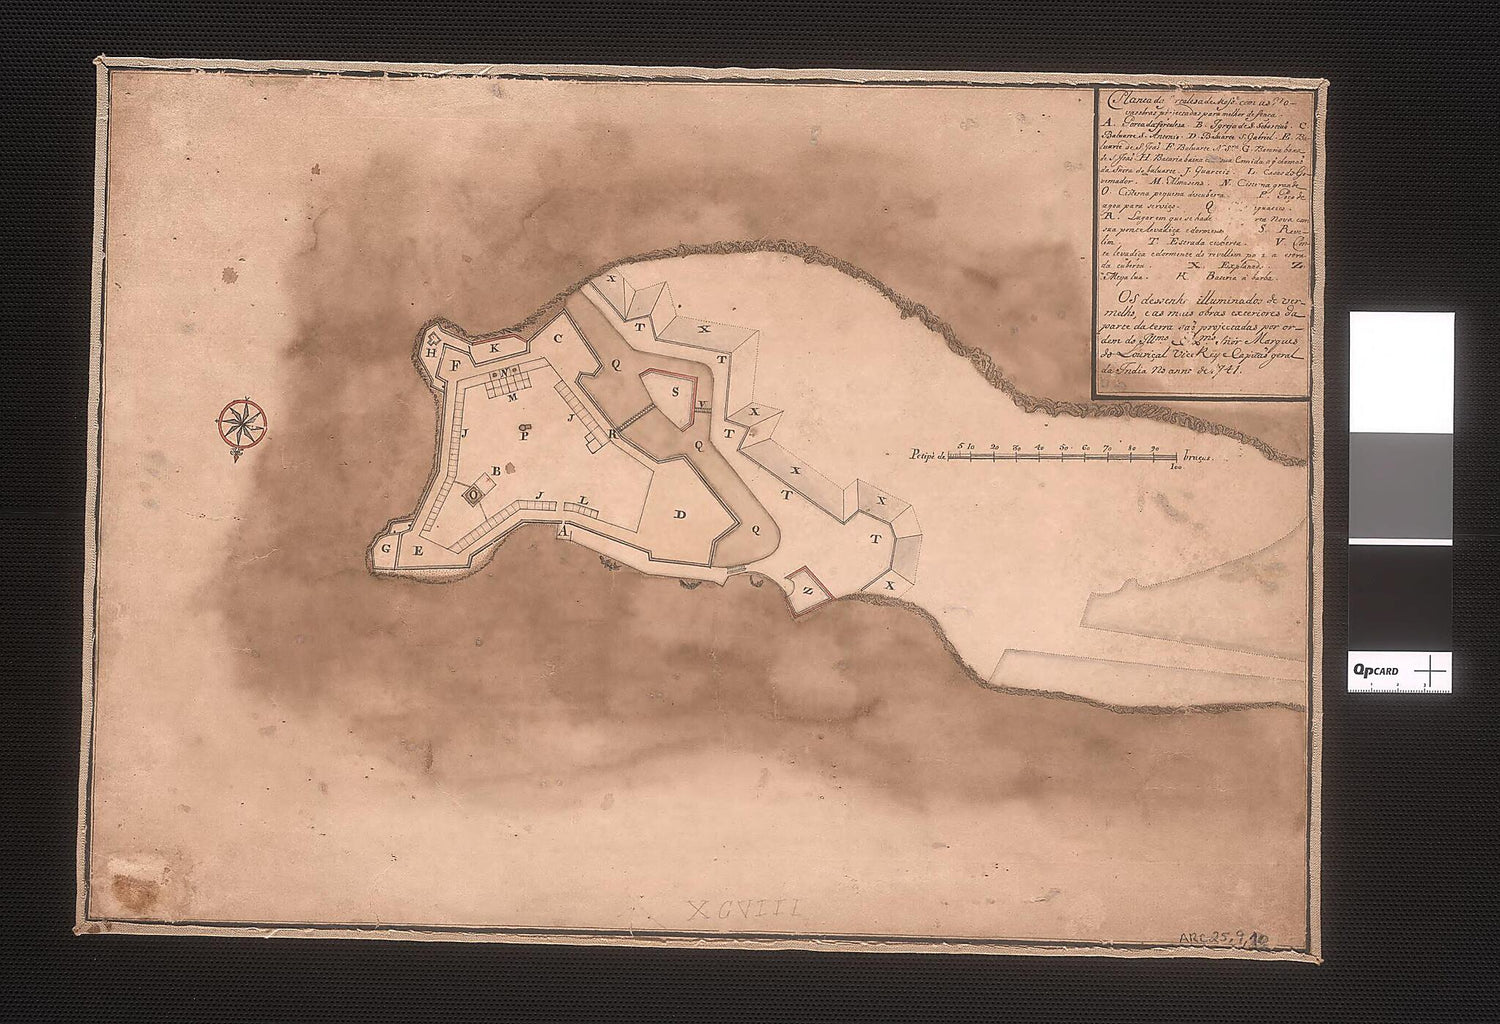 This old map of Map of the Fortress of Mozambique With New Works Projected for Better Defense. (Planta Da Fortaleza De Mosse. Moçambique Com As Novas Obras Projectadas Para Melhor Defença) from 1741 was created by  in 1741